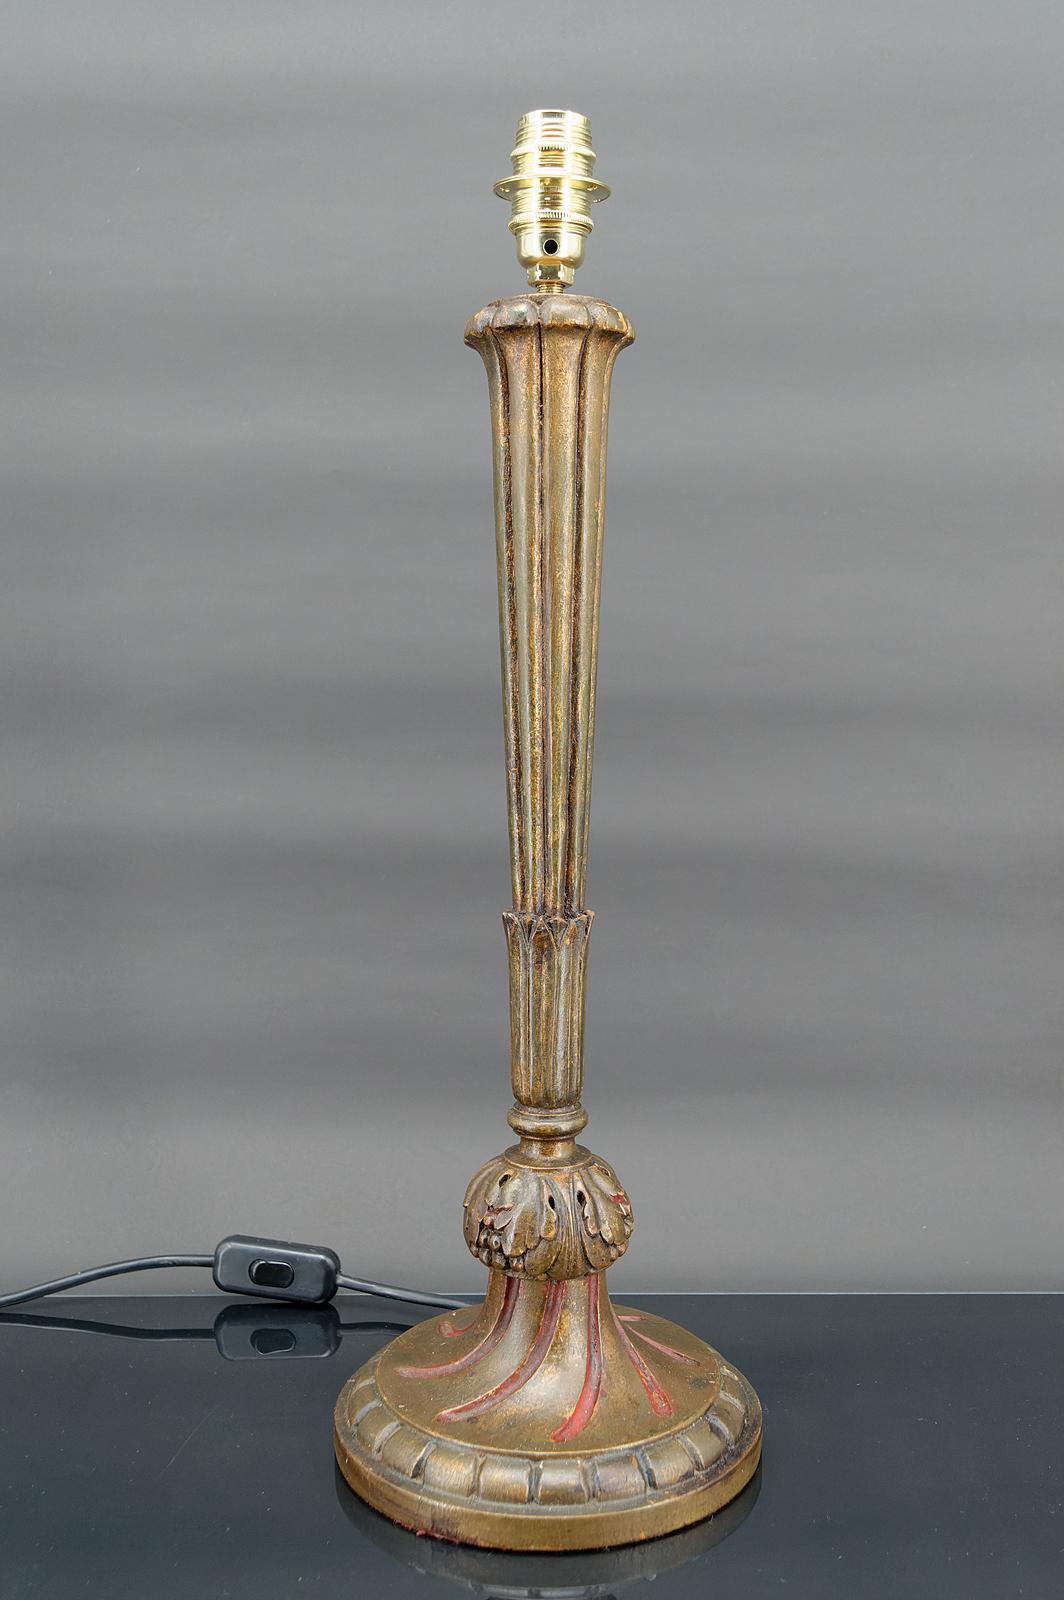 Large gilded wood lamp.
Art Deco.
France, circa 1920

In good condition, electricity OK.

Dimensions:
height 51 cm
diameter 18 cm